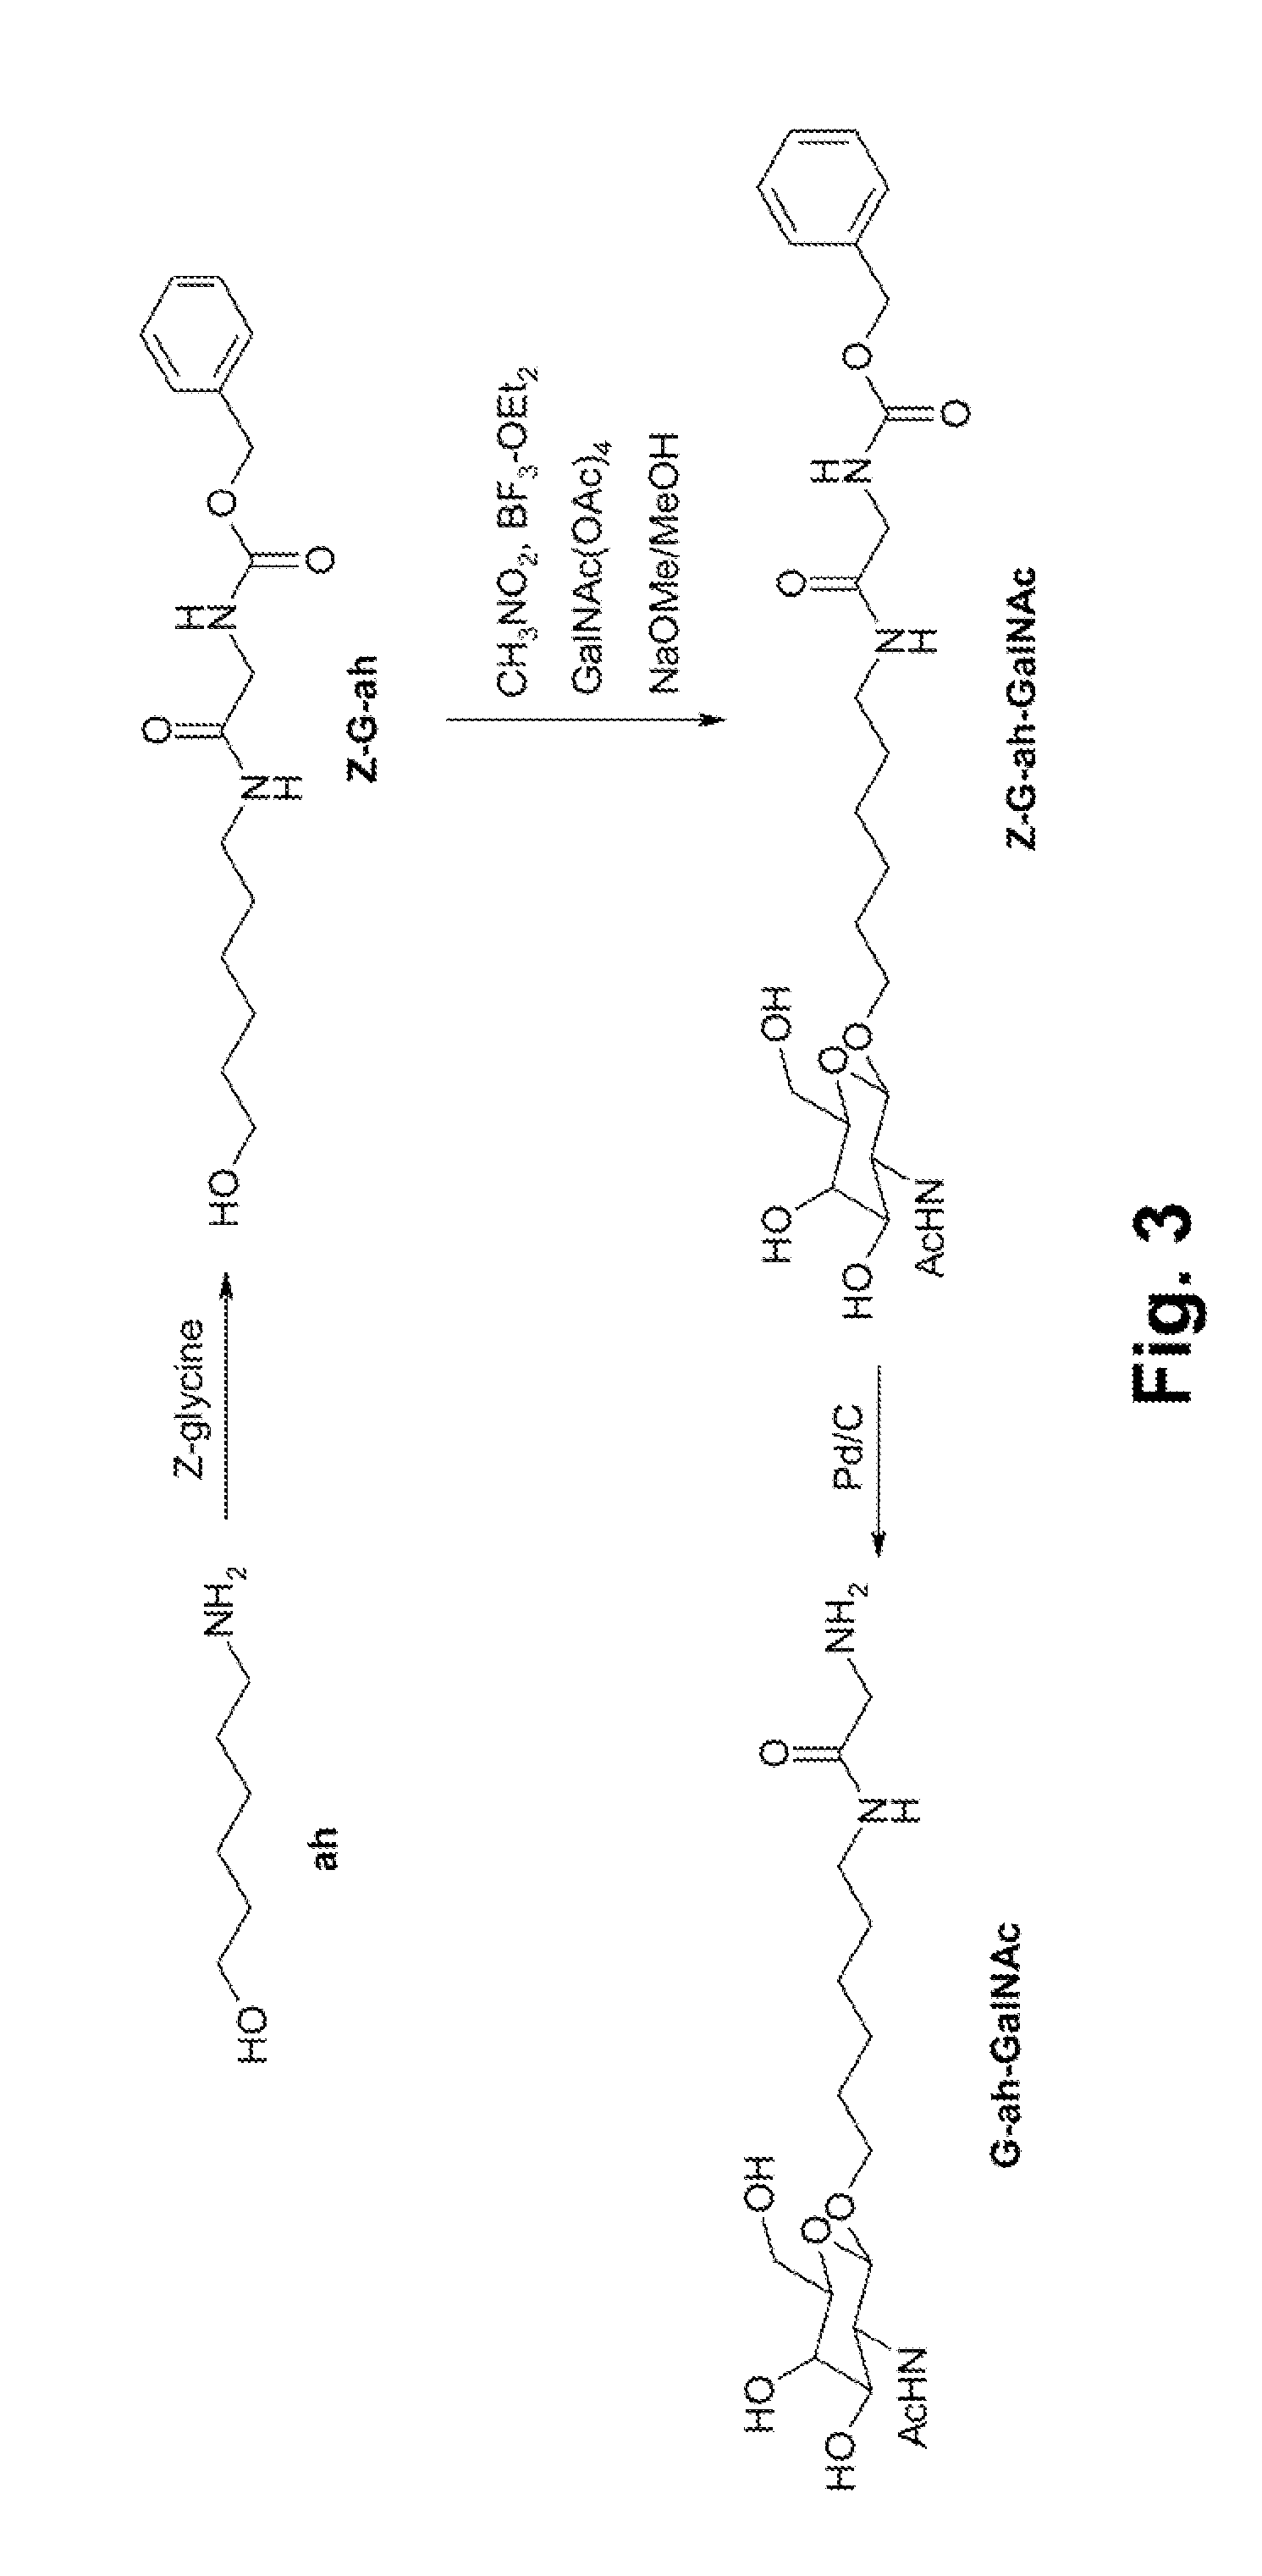 Method for preparing precursor used for labeling hepatocyte receptor and containing trisaccharide and DTPA ligand